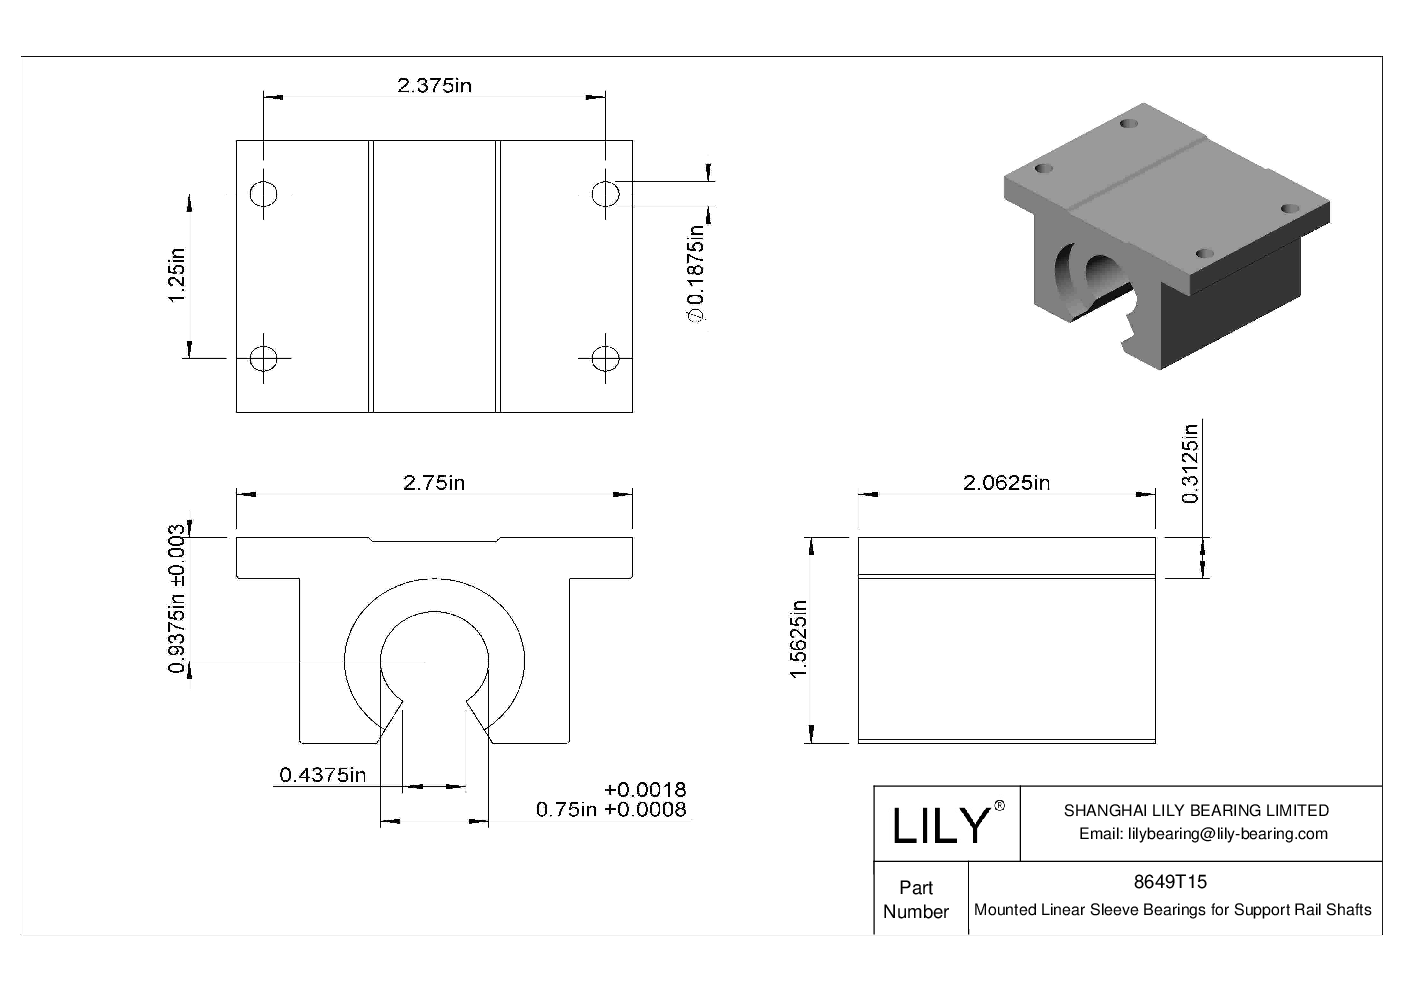 IGEJTBF Common Mounted Linear Sleeve Bearings for Support Rail Shafts cad drawing